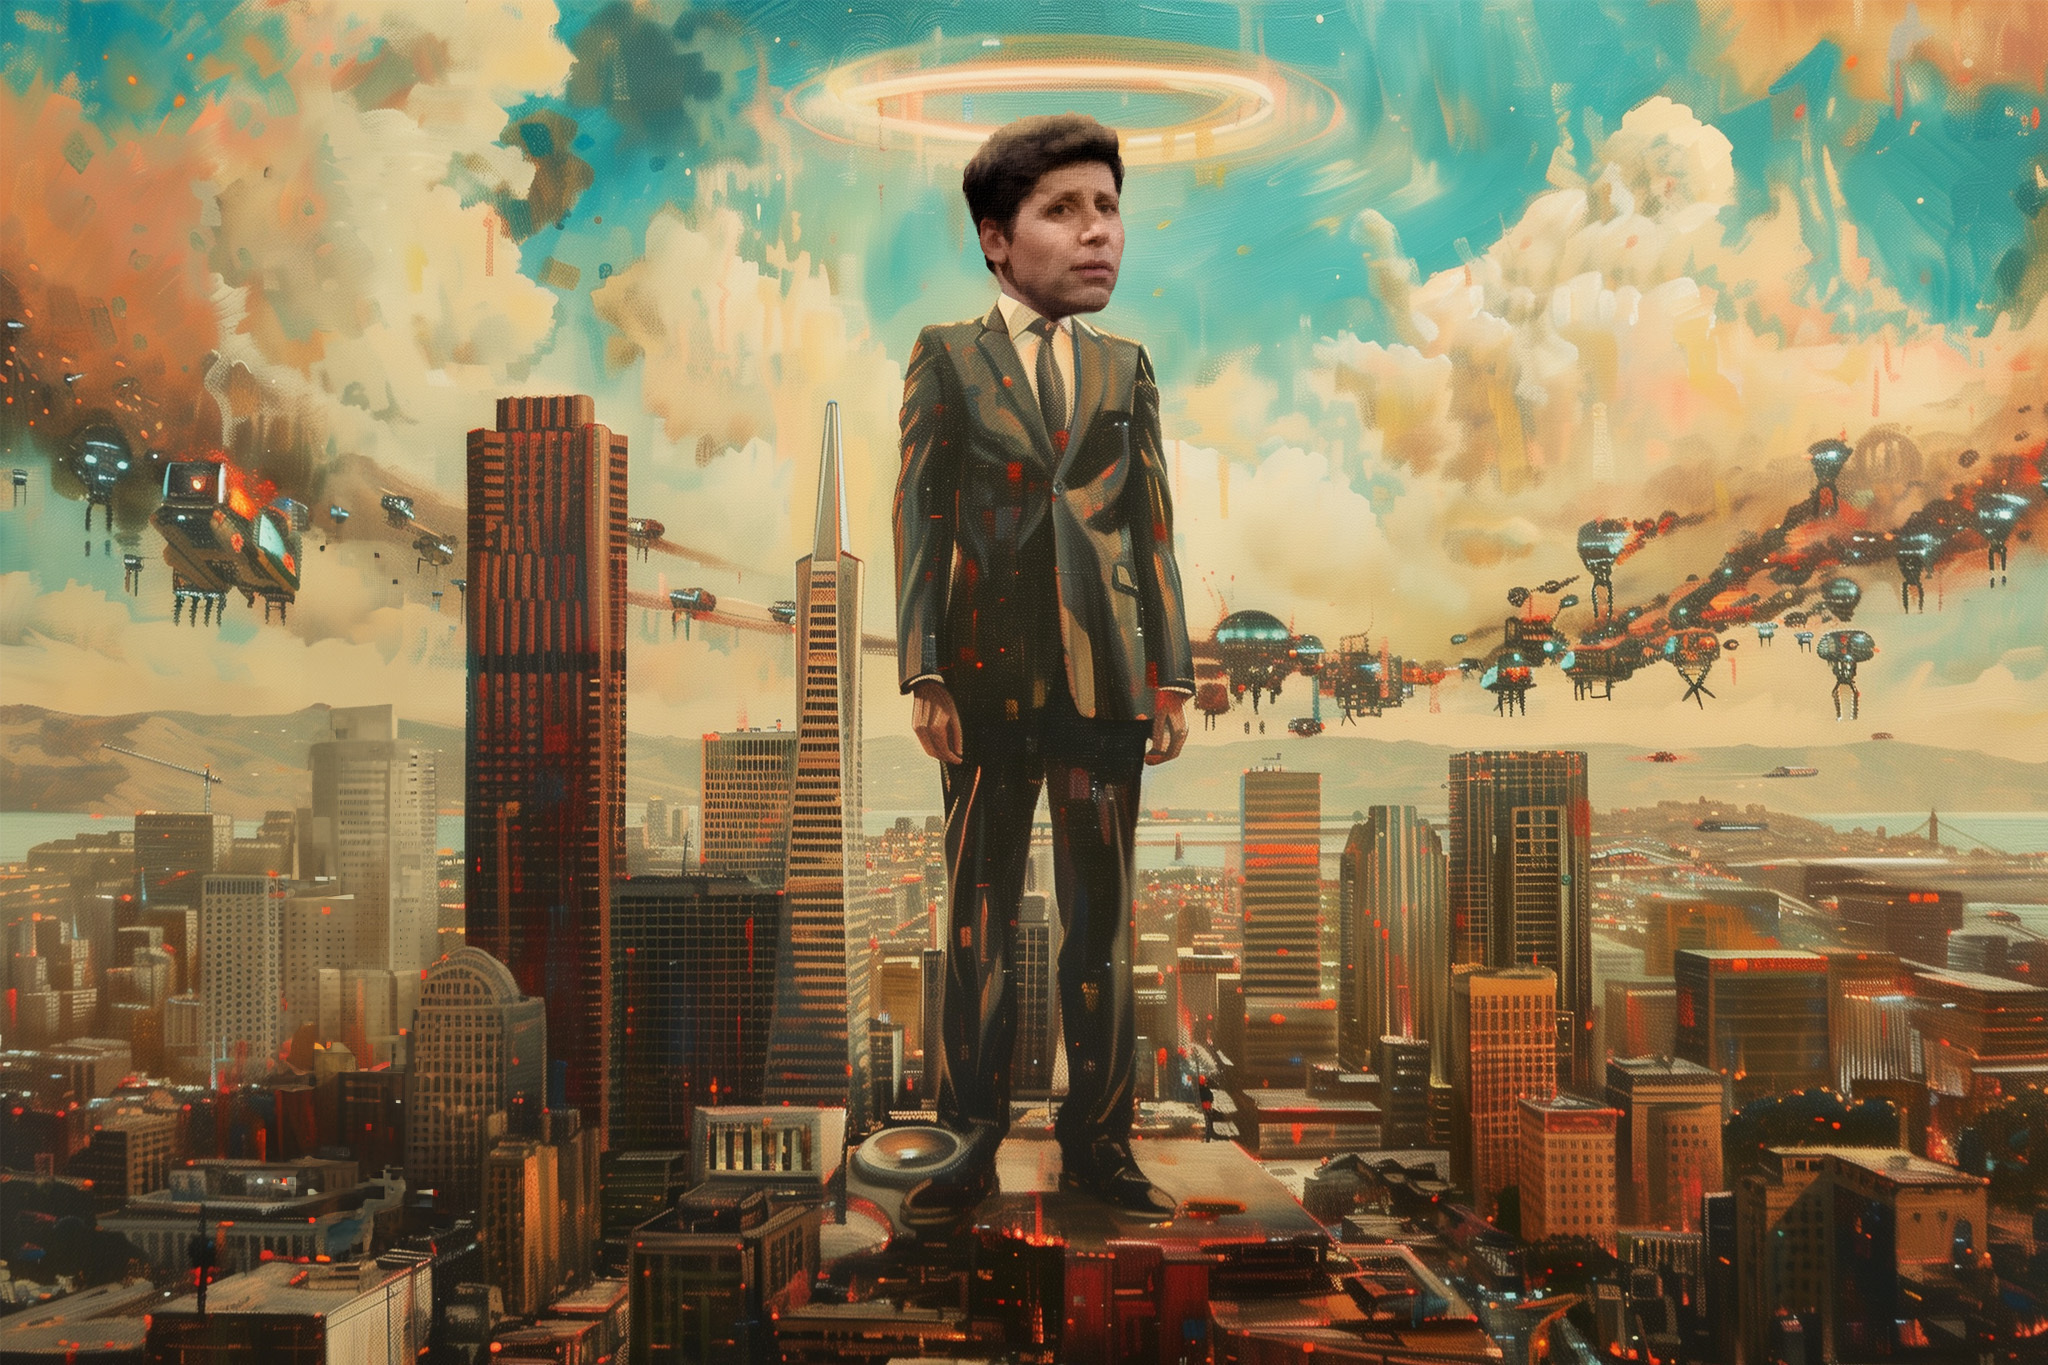 A man in a suit stands towering over a futuristic cityscape with flying vehicles and skyscrapers, under a dramatic sky with swirling clouds and colorful lights.